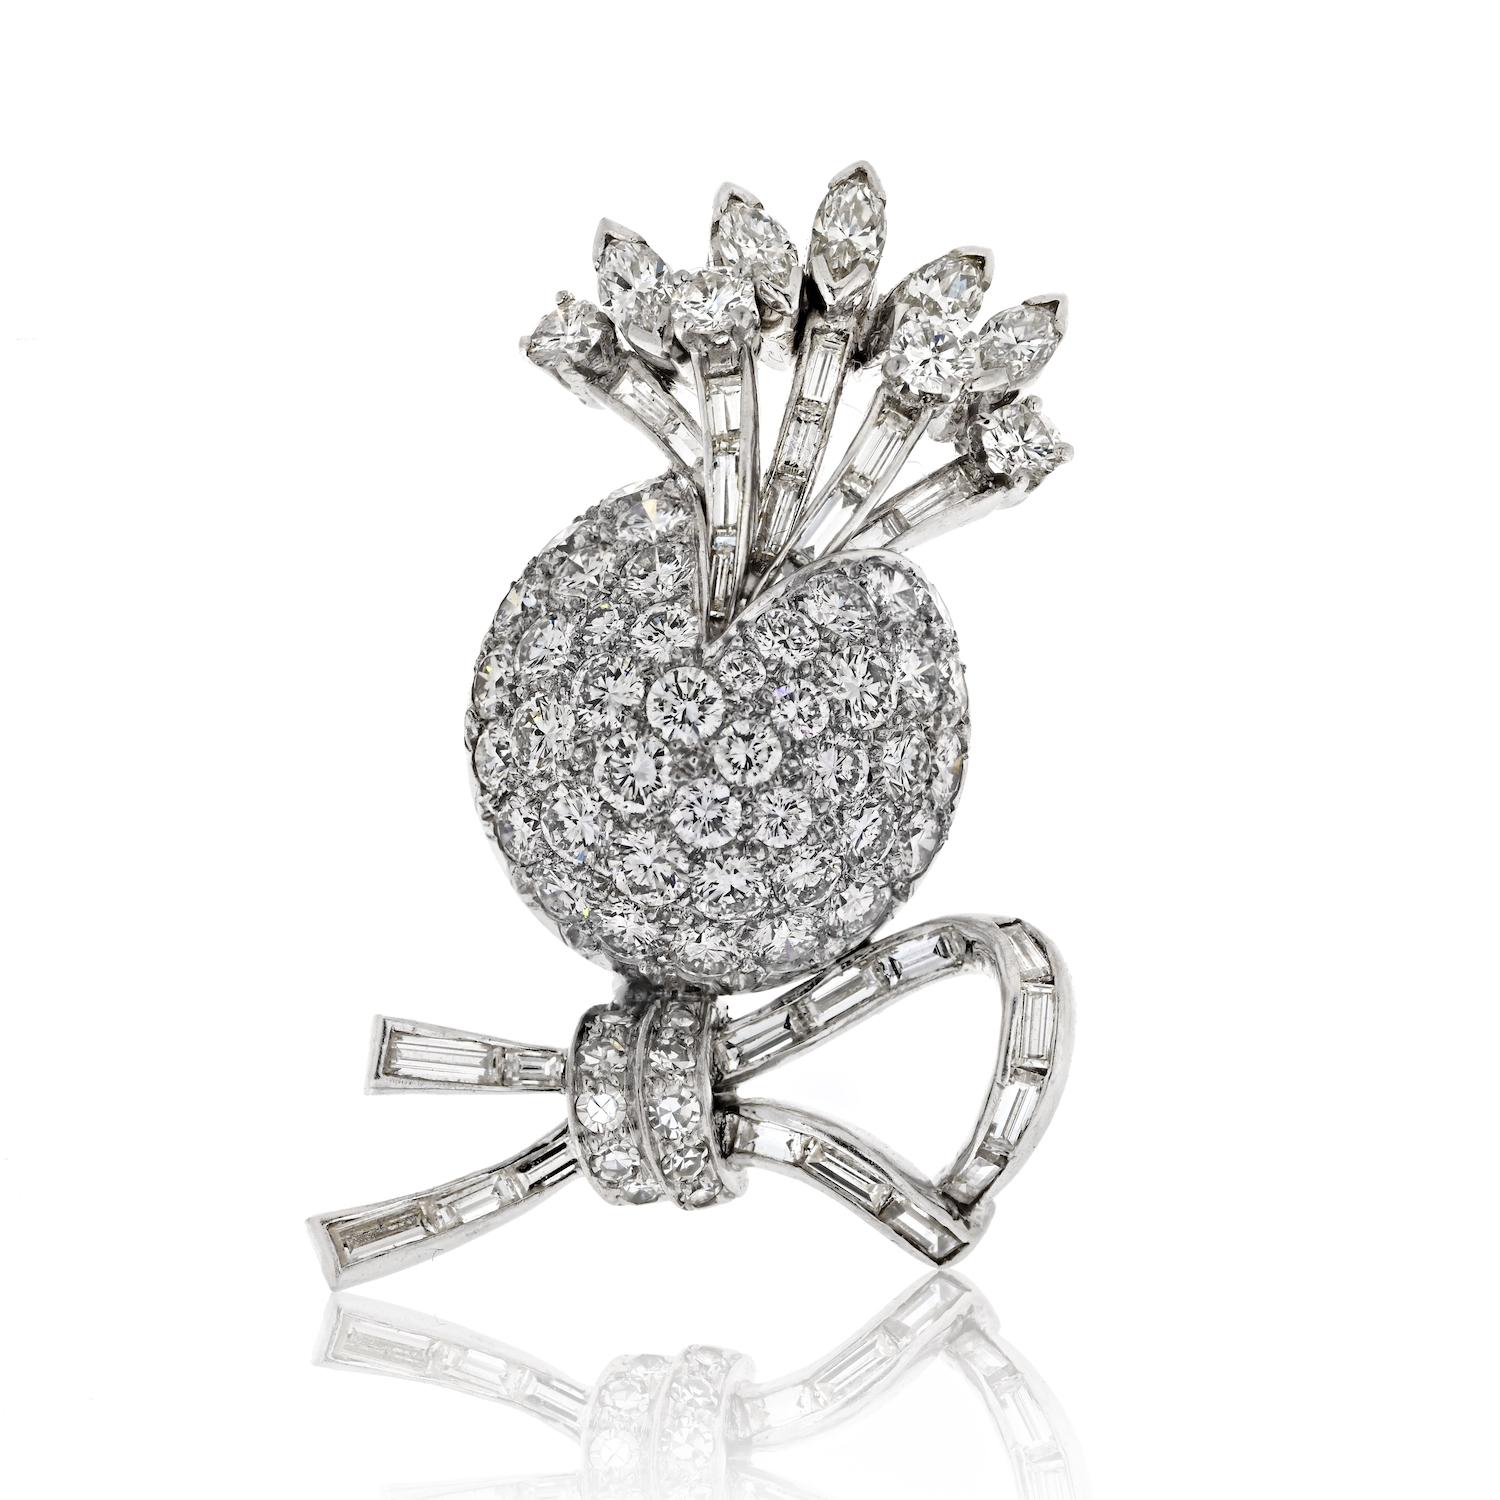 Perfect diamond brooch to decorate your blazer or your dress for the next event or special occasion. This brooch is made in platinum with 4.50cts in mixed cut diamonds and is all fire!
It is not too big just 1.25 inches wide whi]ch is perfect in